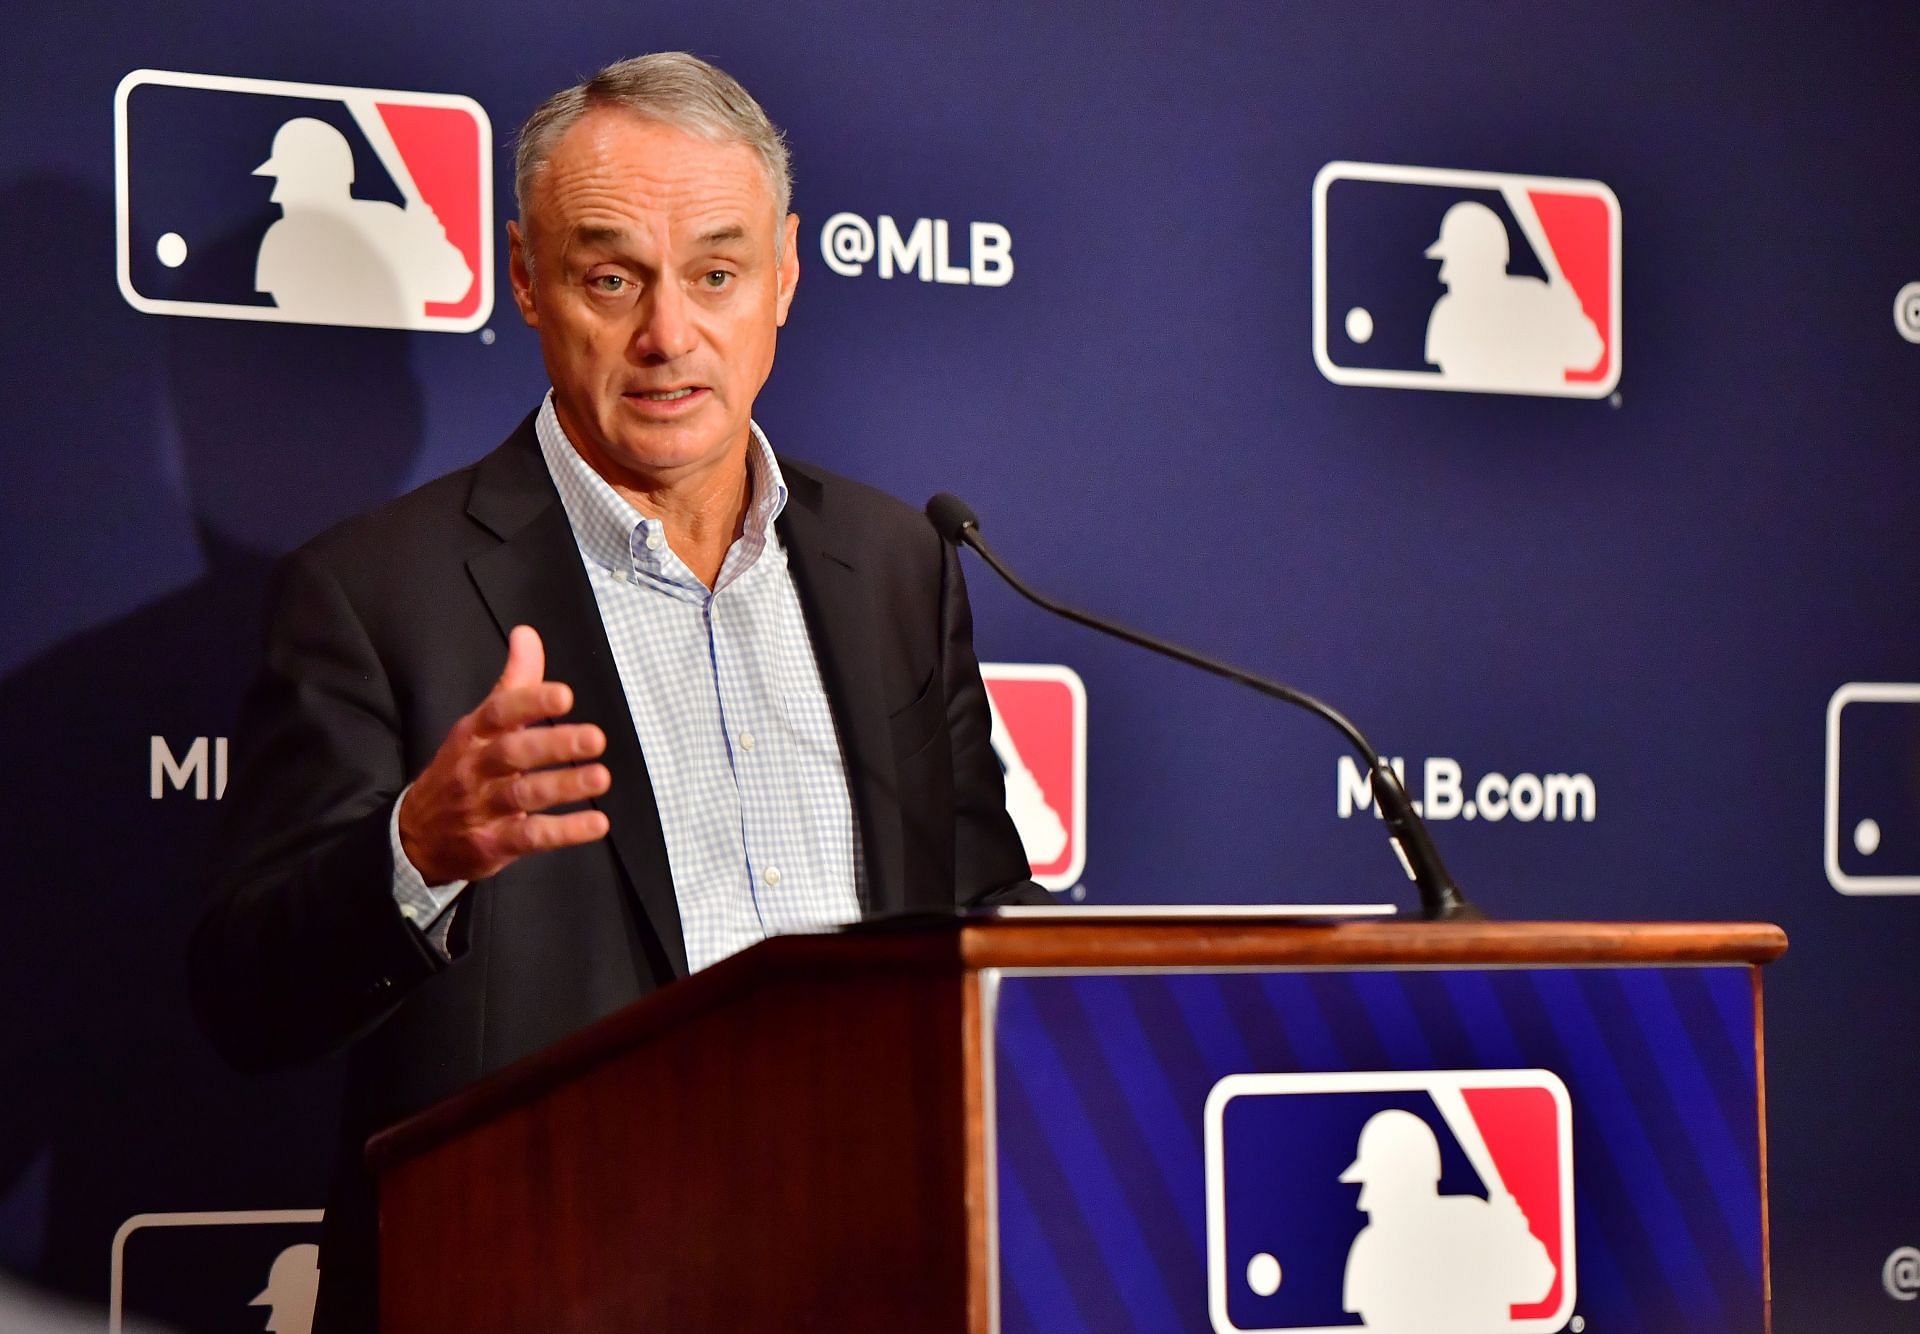 Major League Baseball Commissioner Rob Manfred answers questions during an MLB owners meeting at the Waldorf Astoria.